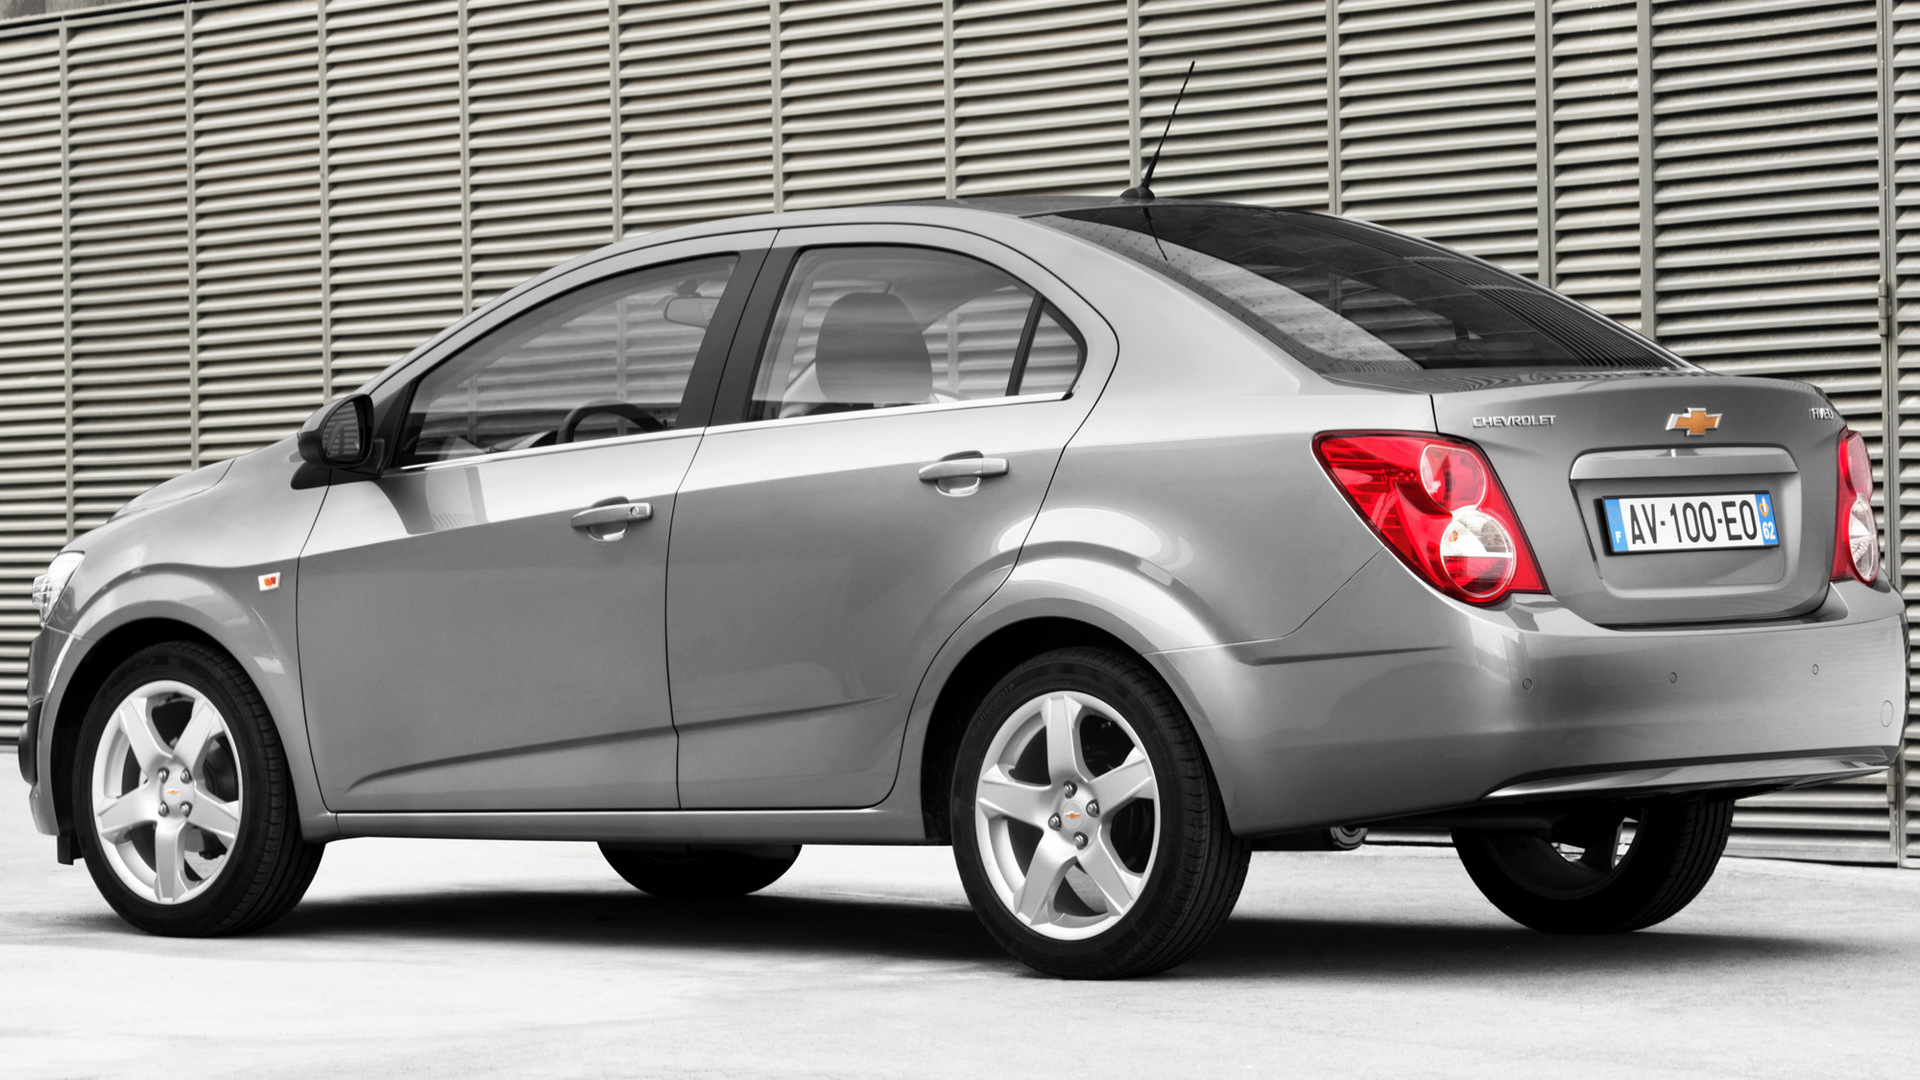 2011 Chevrolet Aveo Sedan Wallpapers and HD Images Car